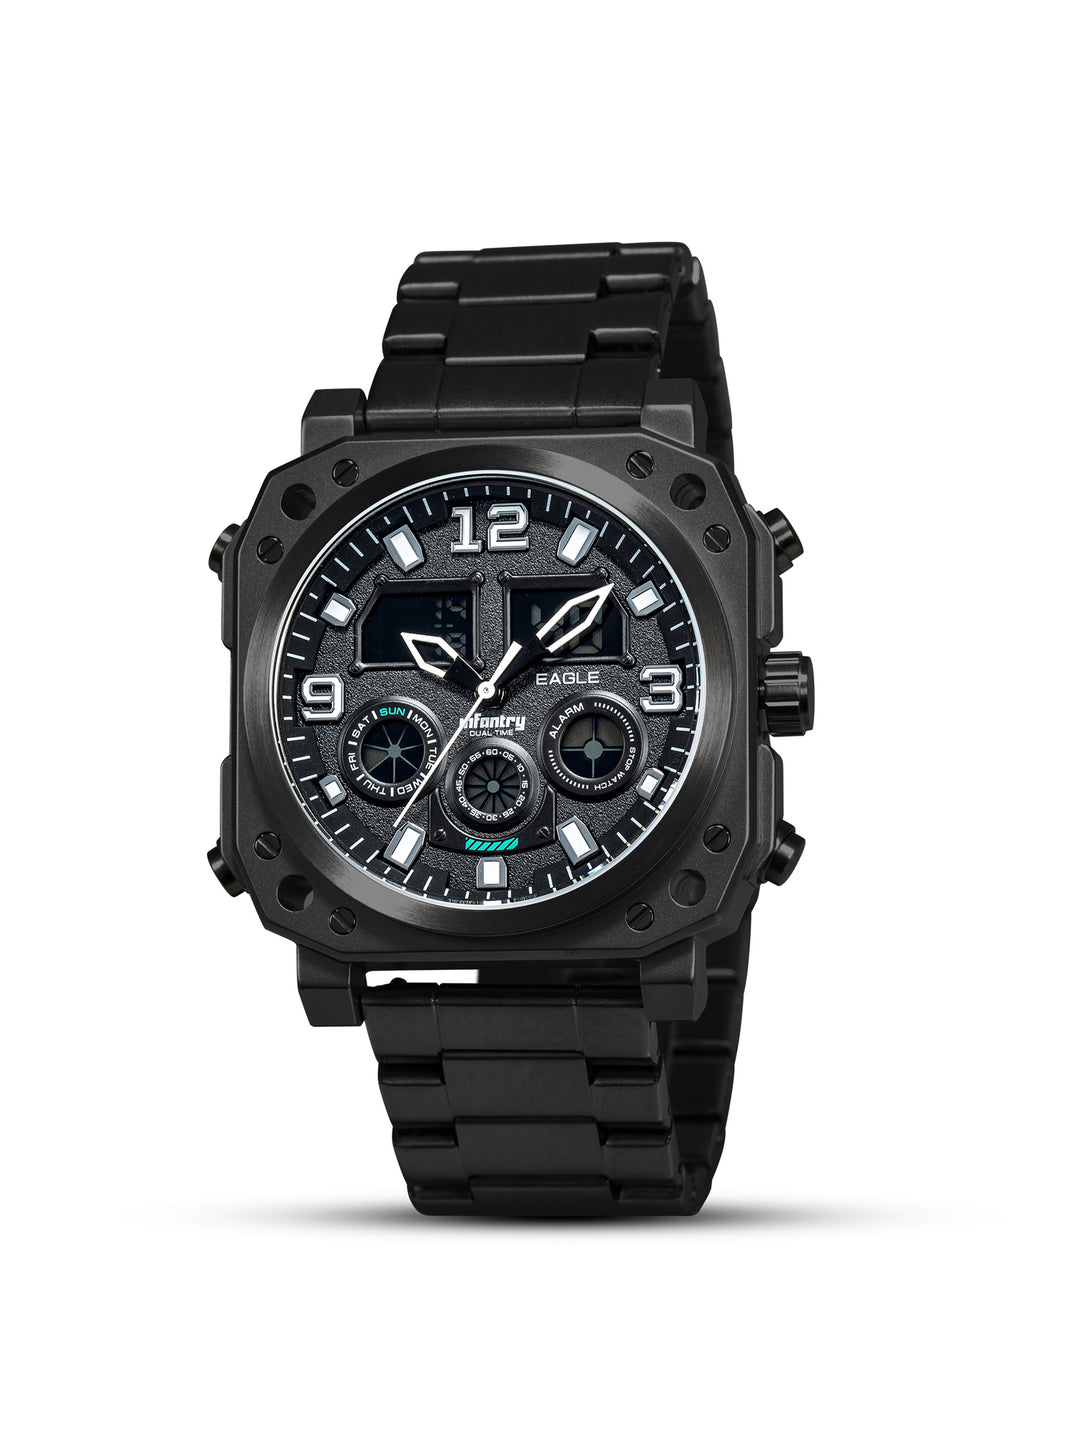 The Eagle Multifunction Dual Timer Ana-Dig Men's Watch - FS-011-BLK-BS